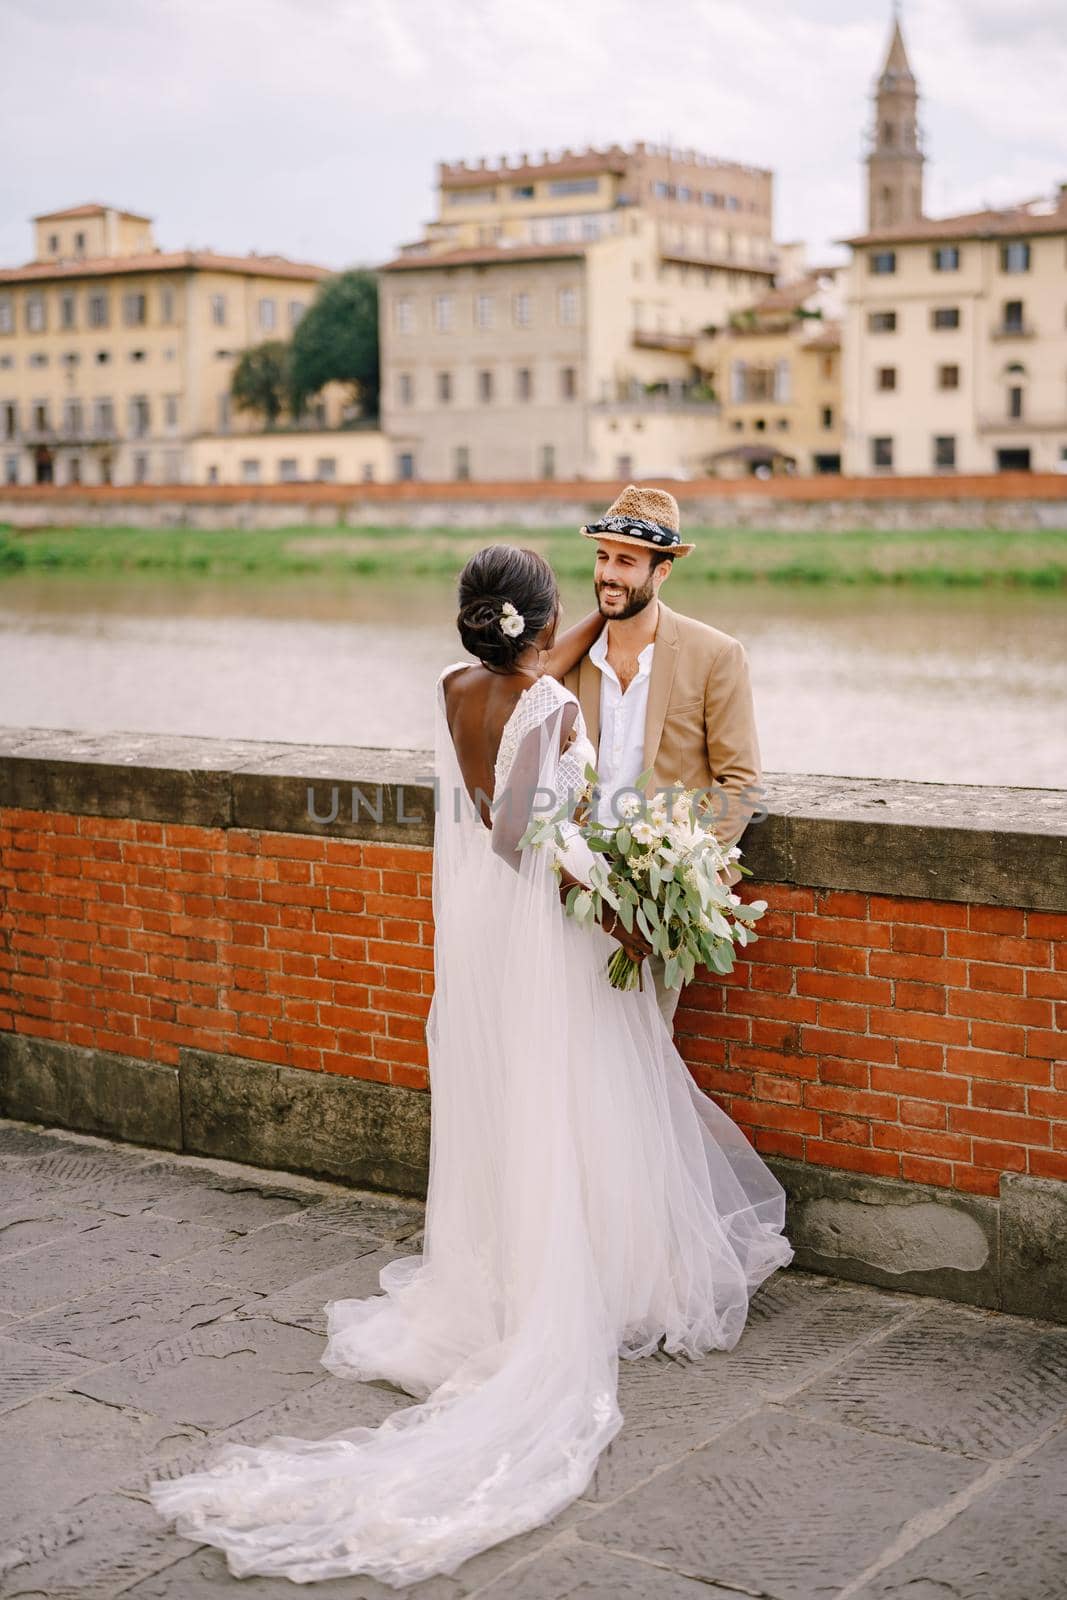 Interracial wedding couple. Wedding in Florence, Italy. African-American bride and Caucasian groom stand embracing on the embankment of the Arno River, overlooking the city and bridges. by Nadtochiy